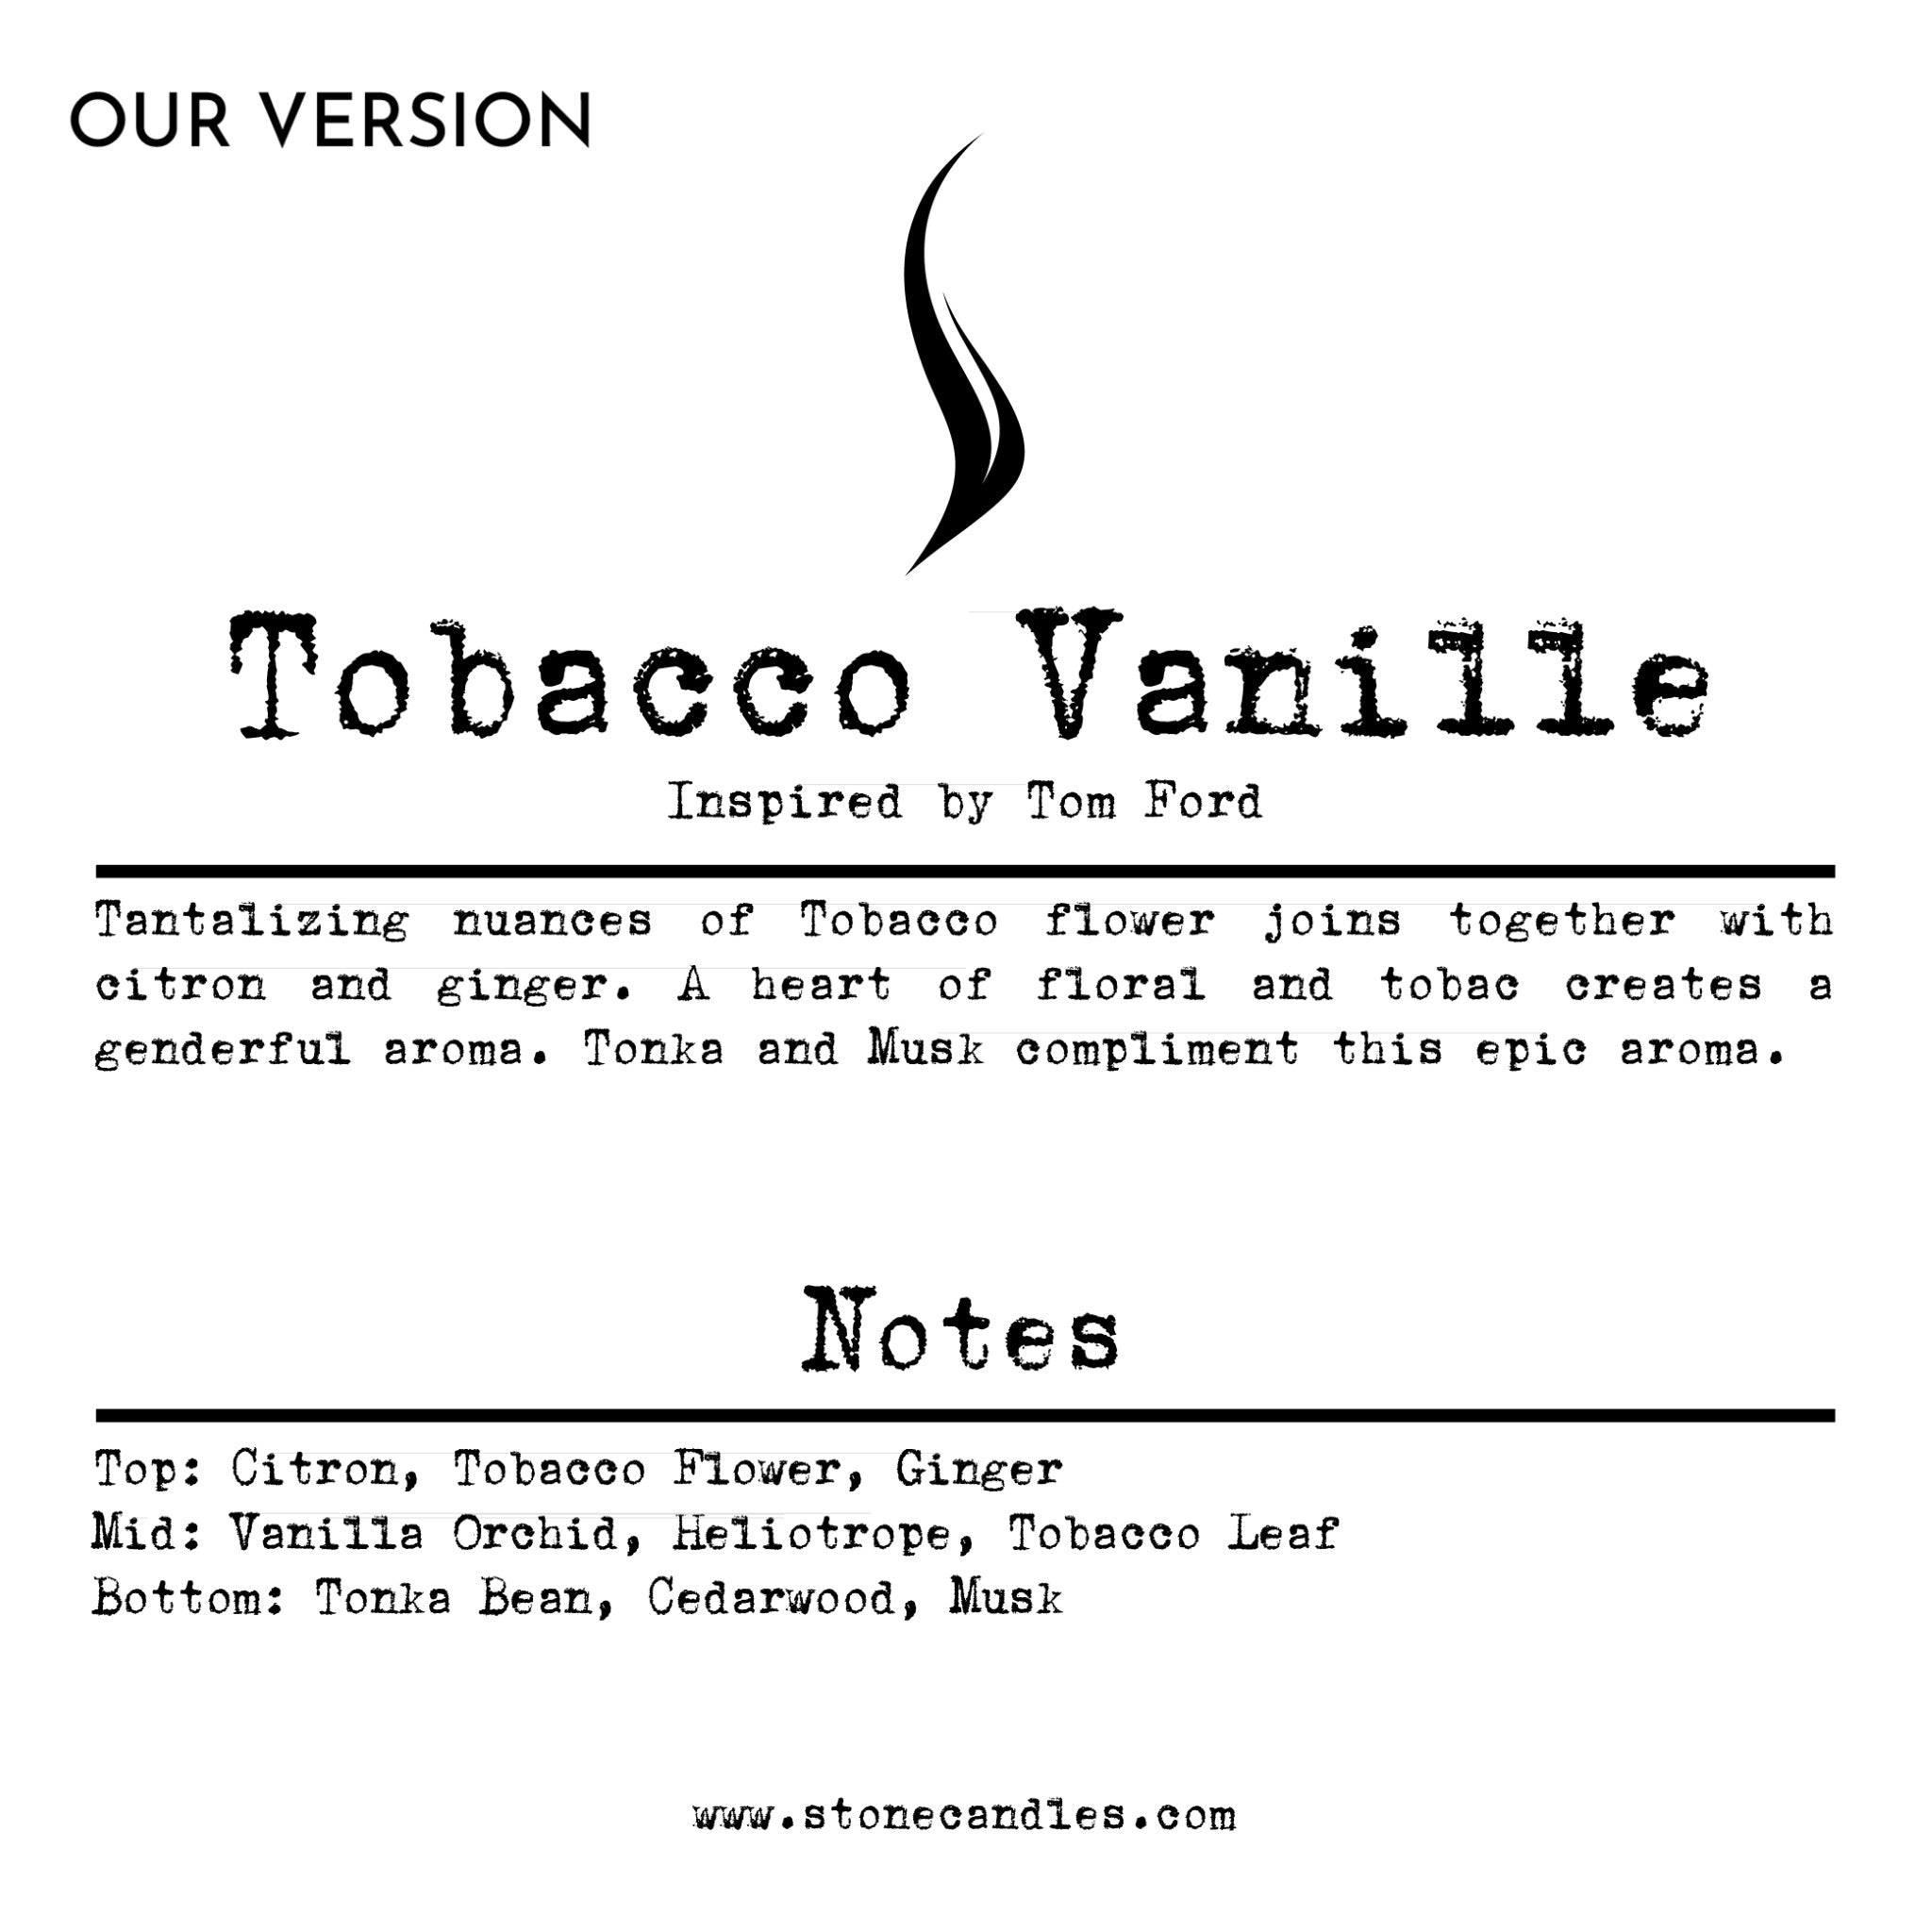 Tobacco Vanille (our version) Sample Scent Strip